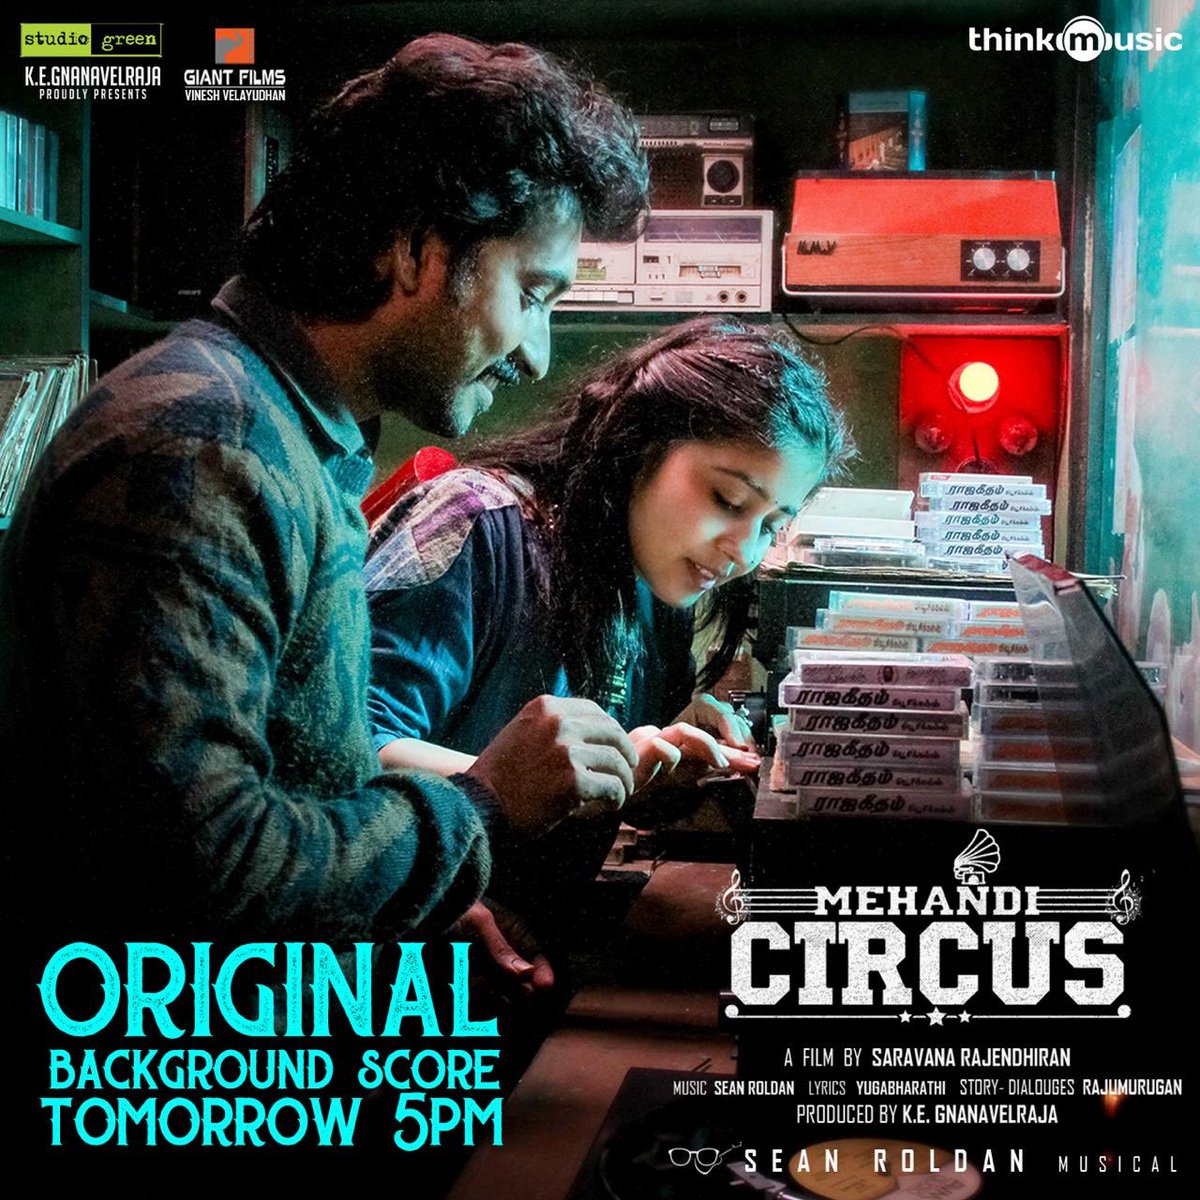 Tomorrow the OST of #MehandiCircus will be out on @thinkmusicindia at 5 pm. I’d like to take this opportunity to thank all my musicians, especially #RaviG @Ishitk @sushasings @Prith_Official for their contributions. @Madhampatty @battatawada @SaravanaRajend4